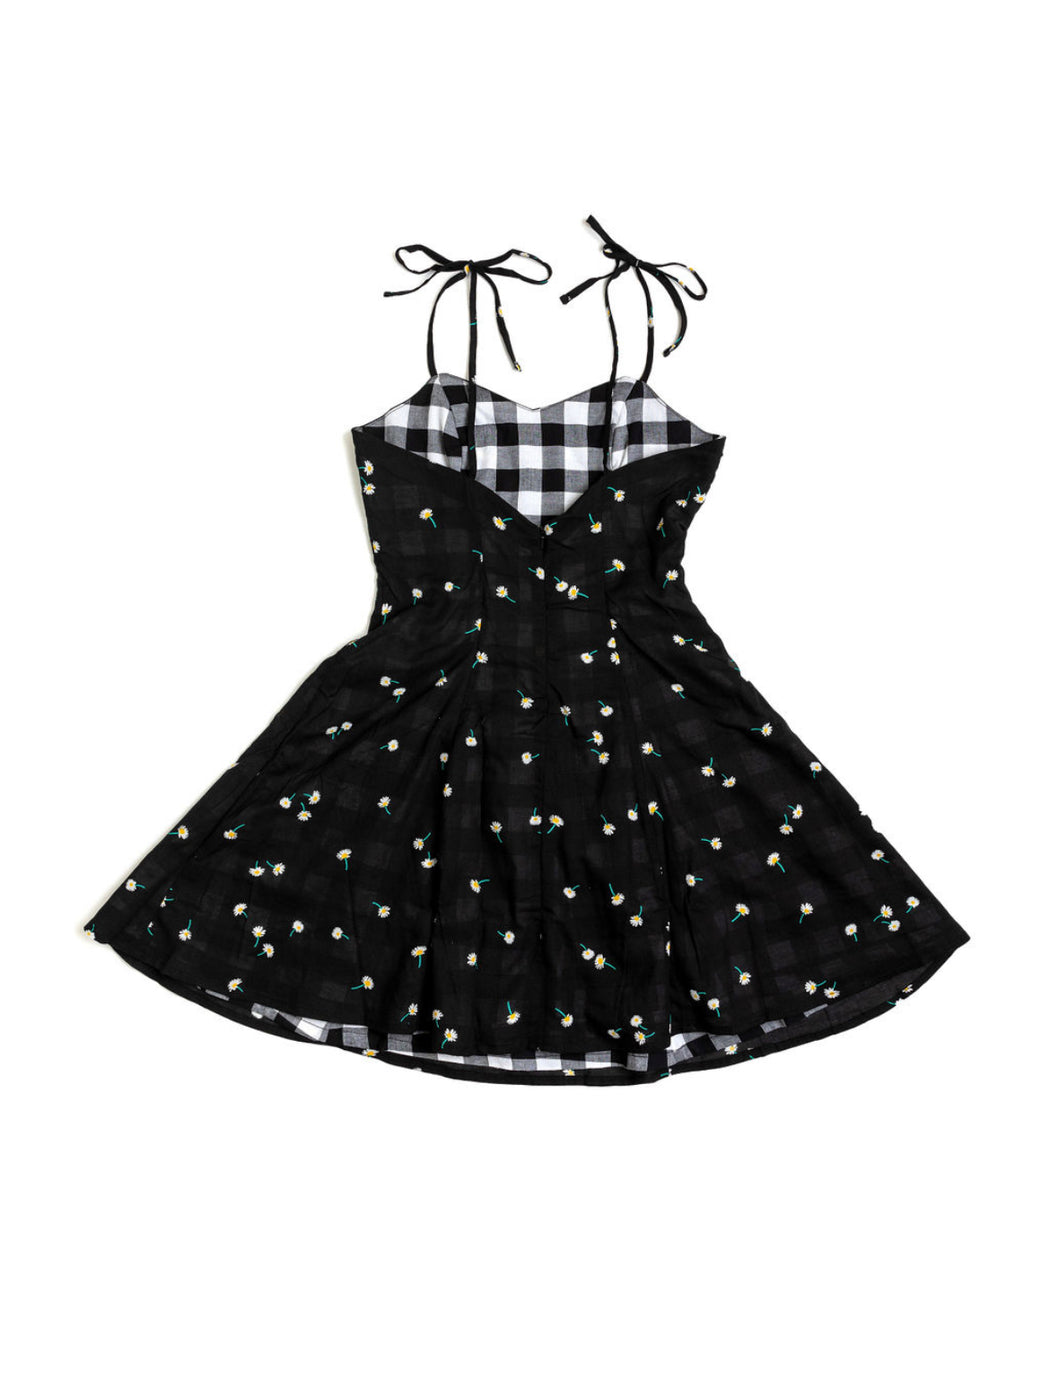 The Skater Dress is full of tricks, like pockets! Designed and sewn in the USA from deadstock cotton. Sustainably made. Easy care fabric. What more does a skater girl (or skater girl at heart) need?